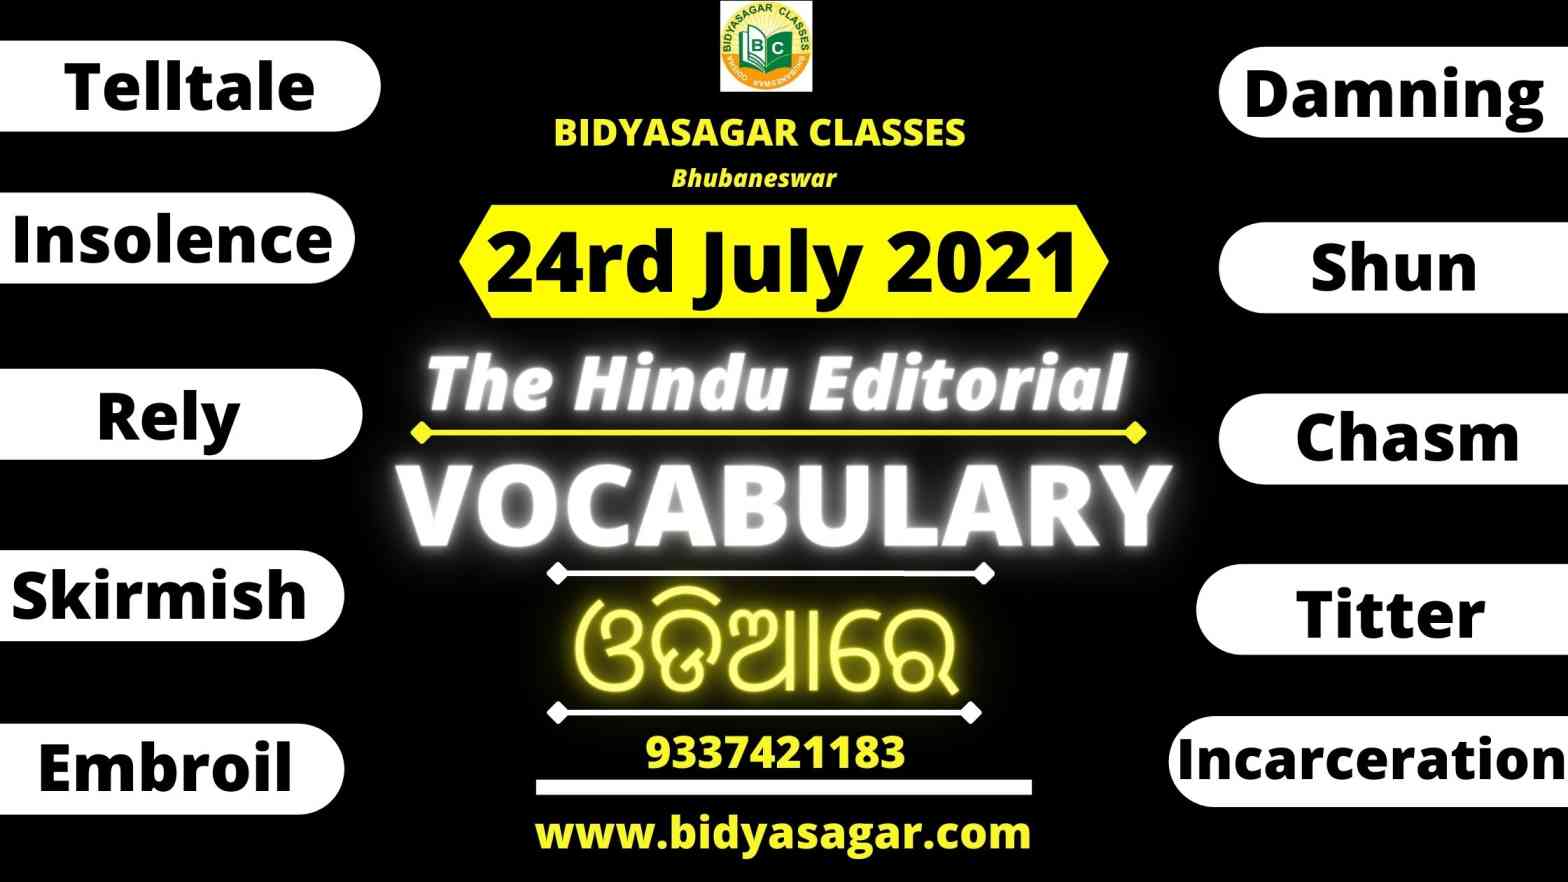 The Hindu Editorial Vocabulary of 24th July 2021